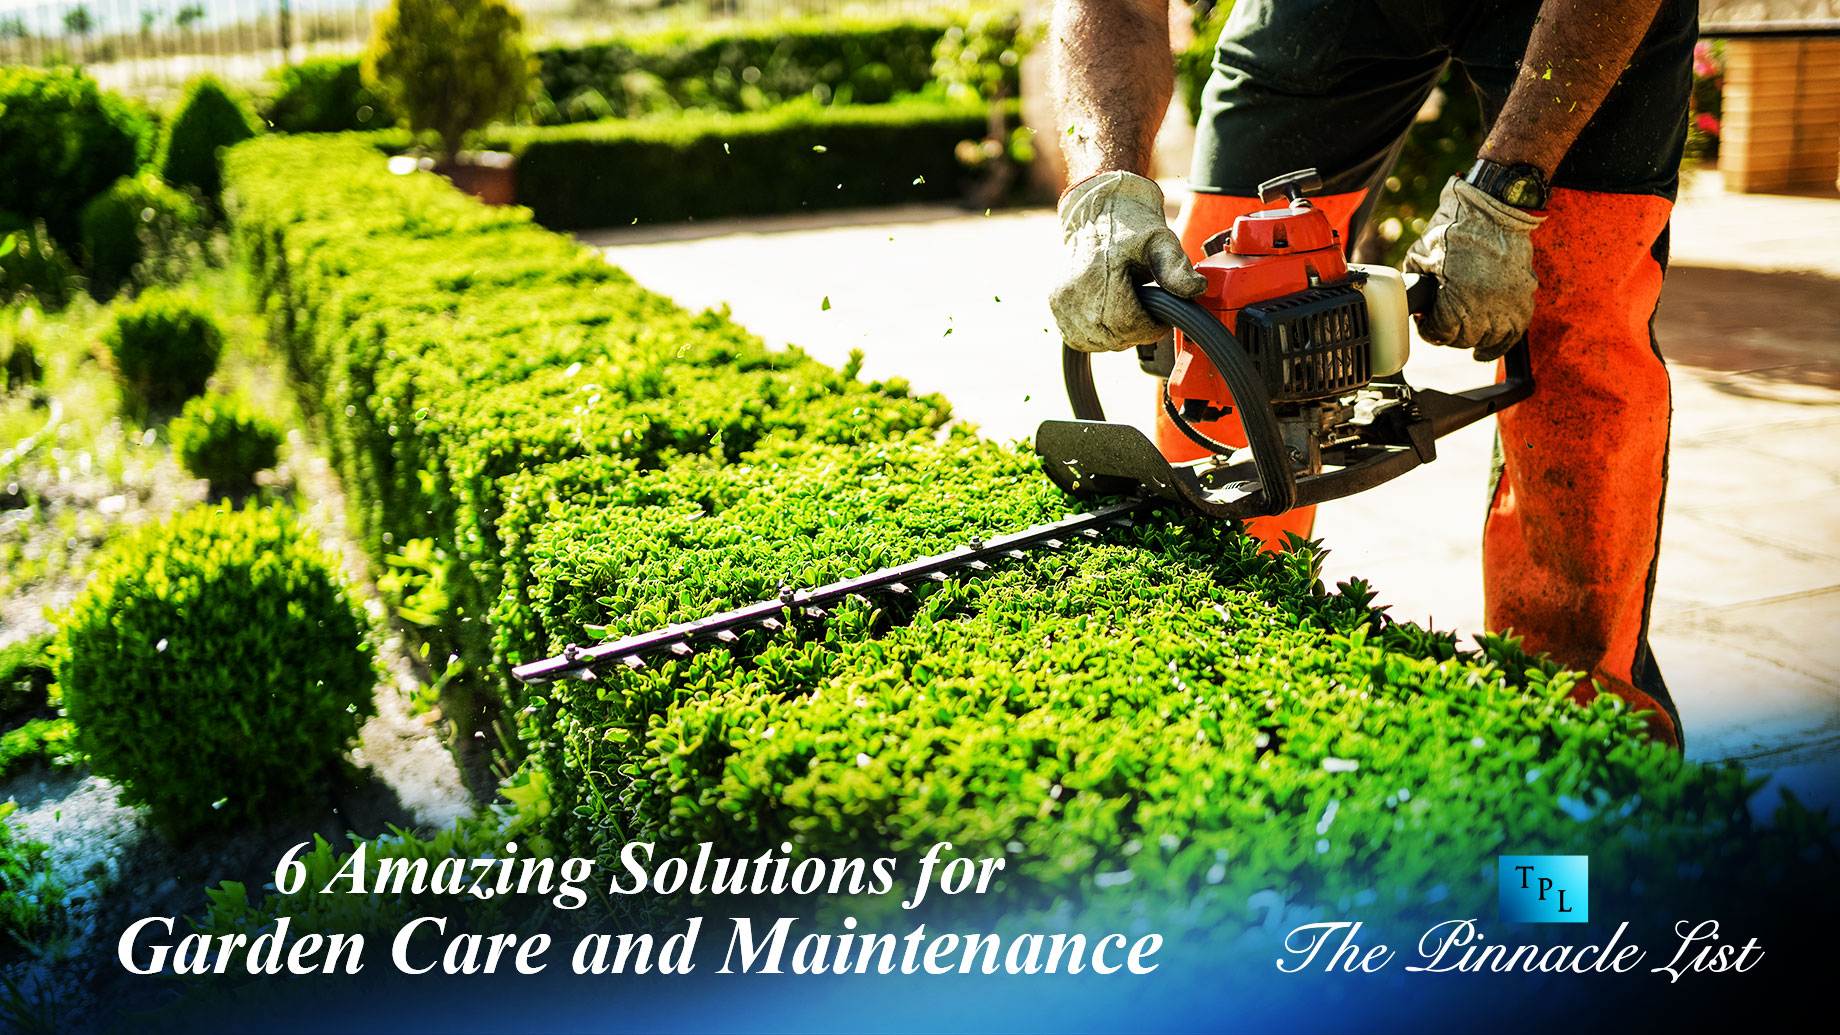 6 Amazing Solutions for Garden Care and Maintenance